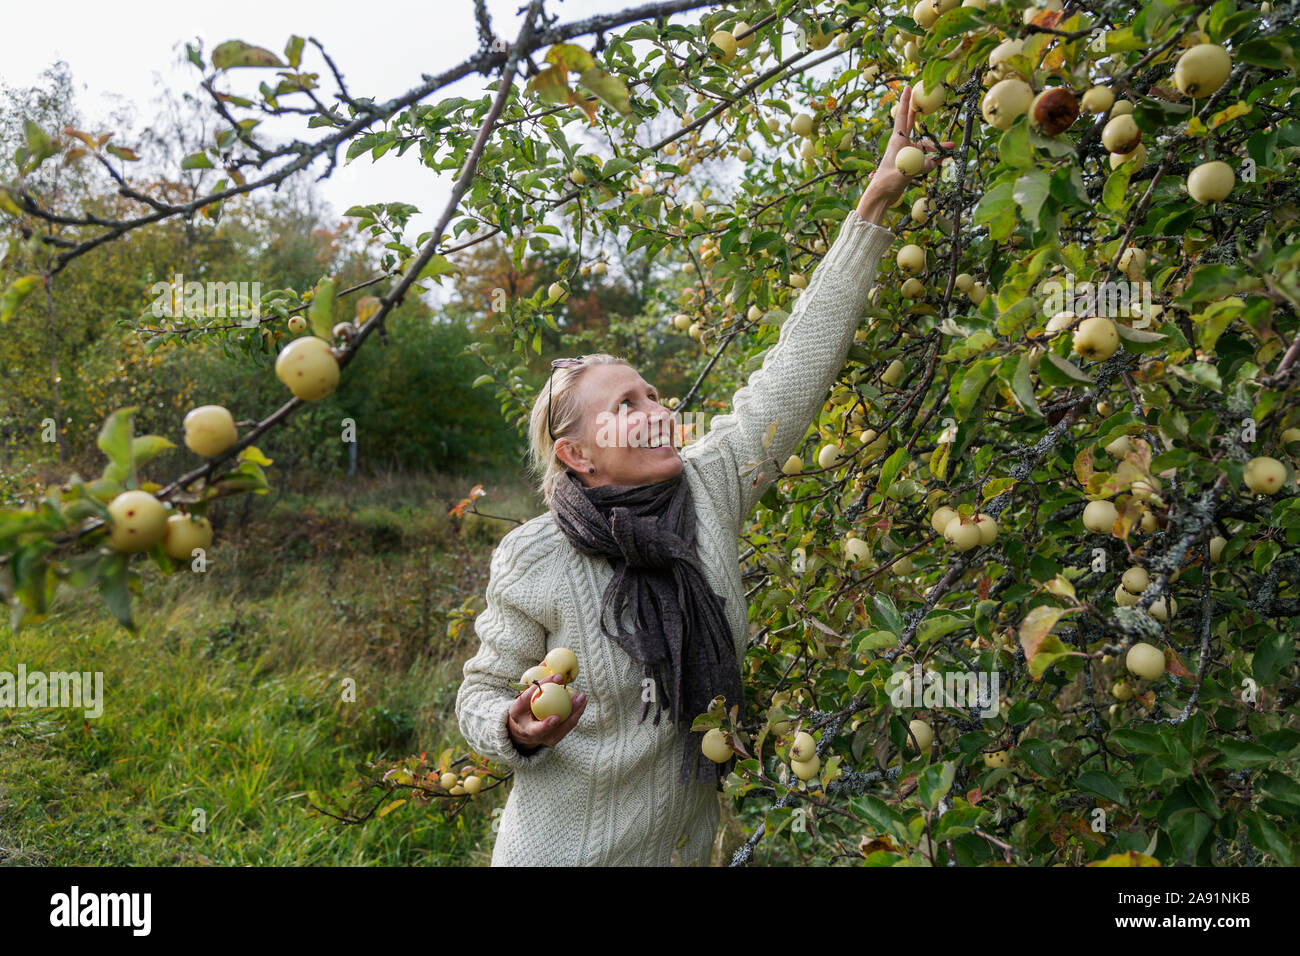 Woman picking apples Banque D'Images